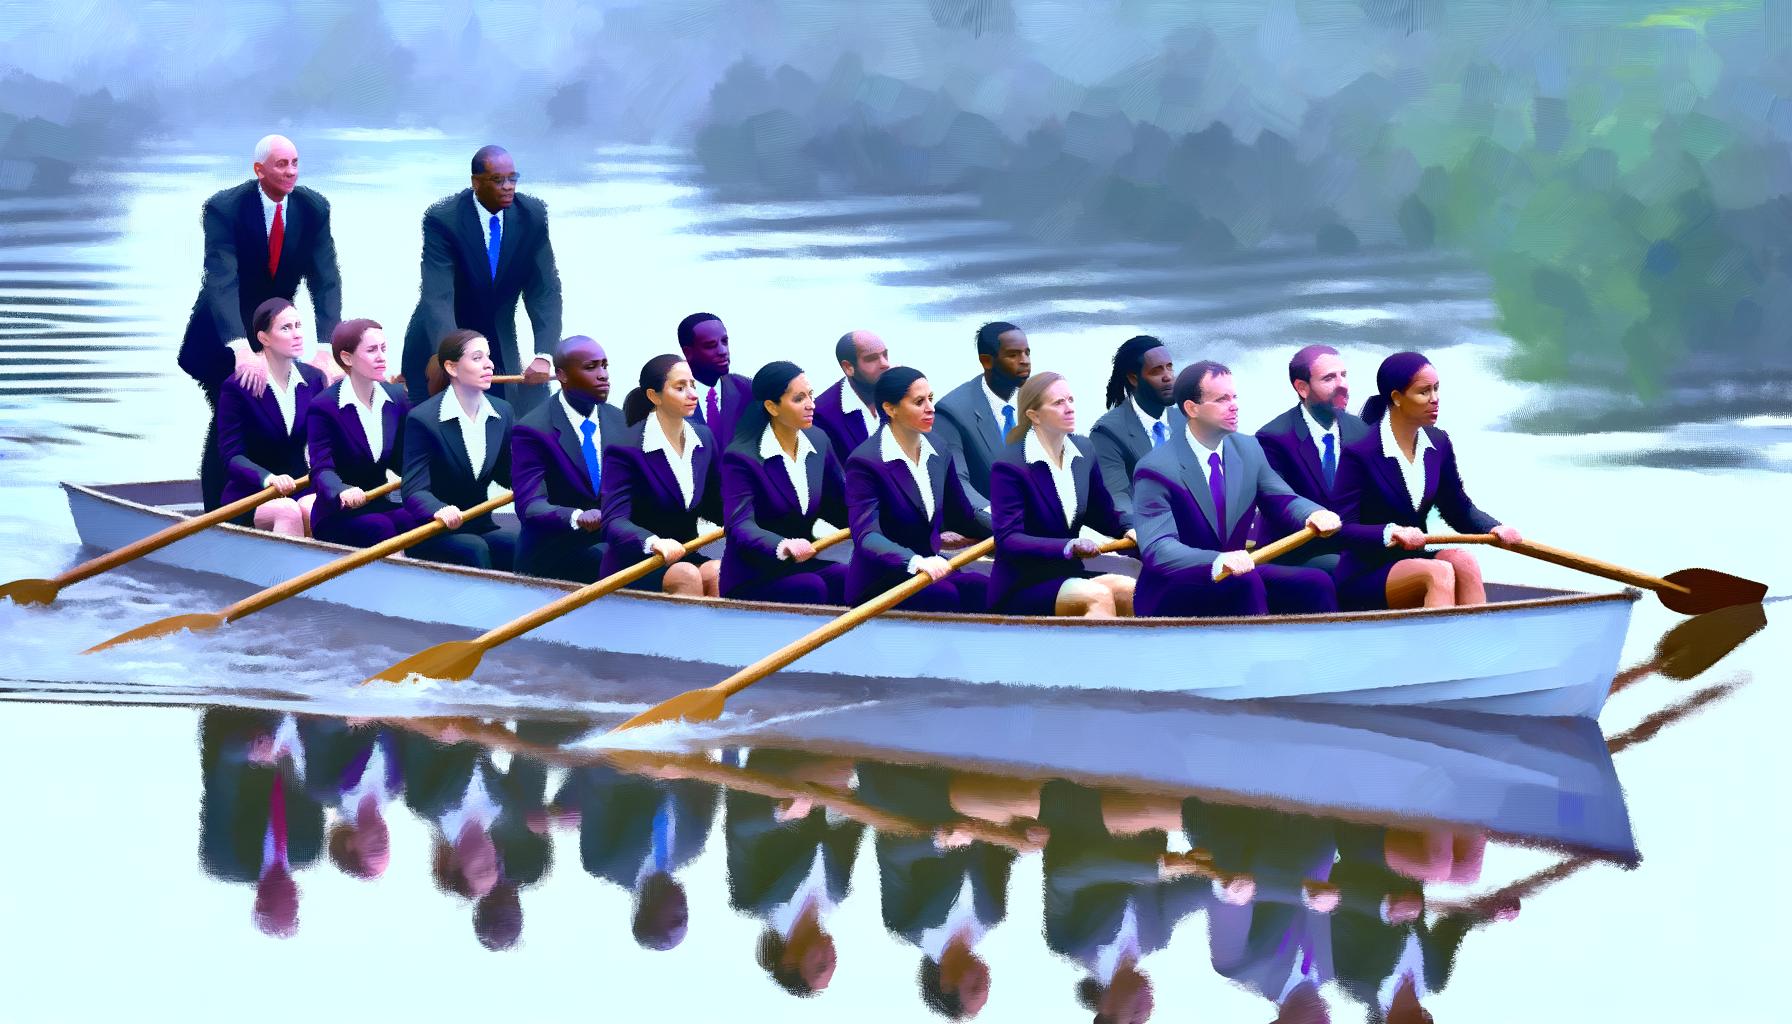 executives rowing in a boat